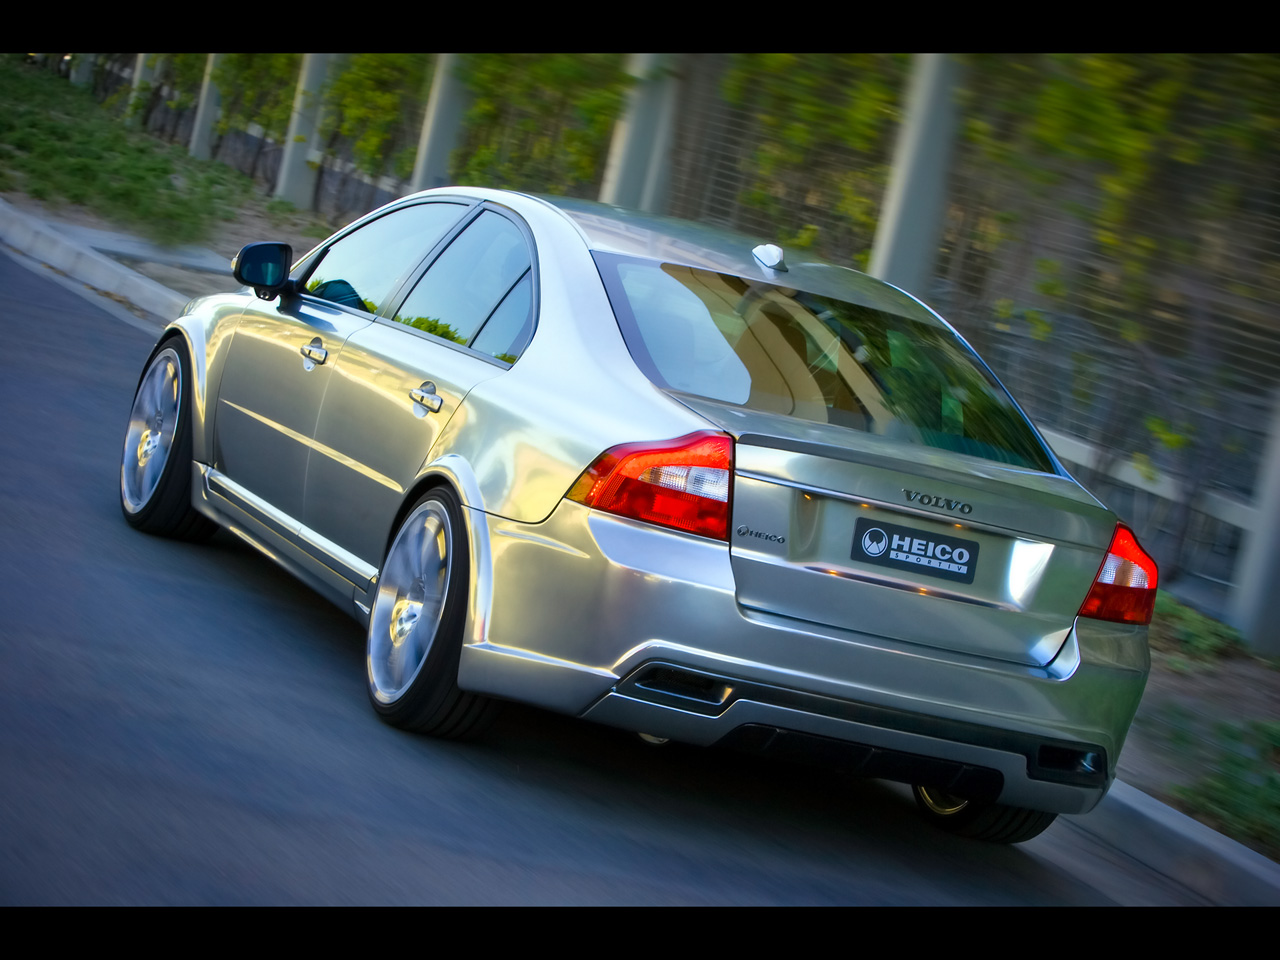 On this page we present you the most successful photo gallery of Volvo S80T